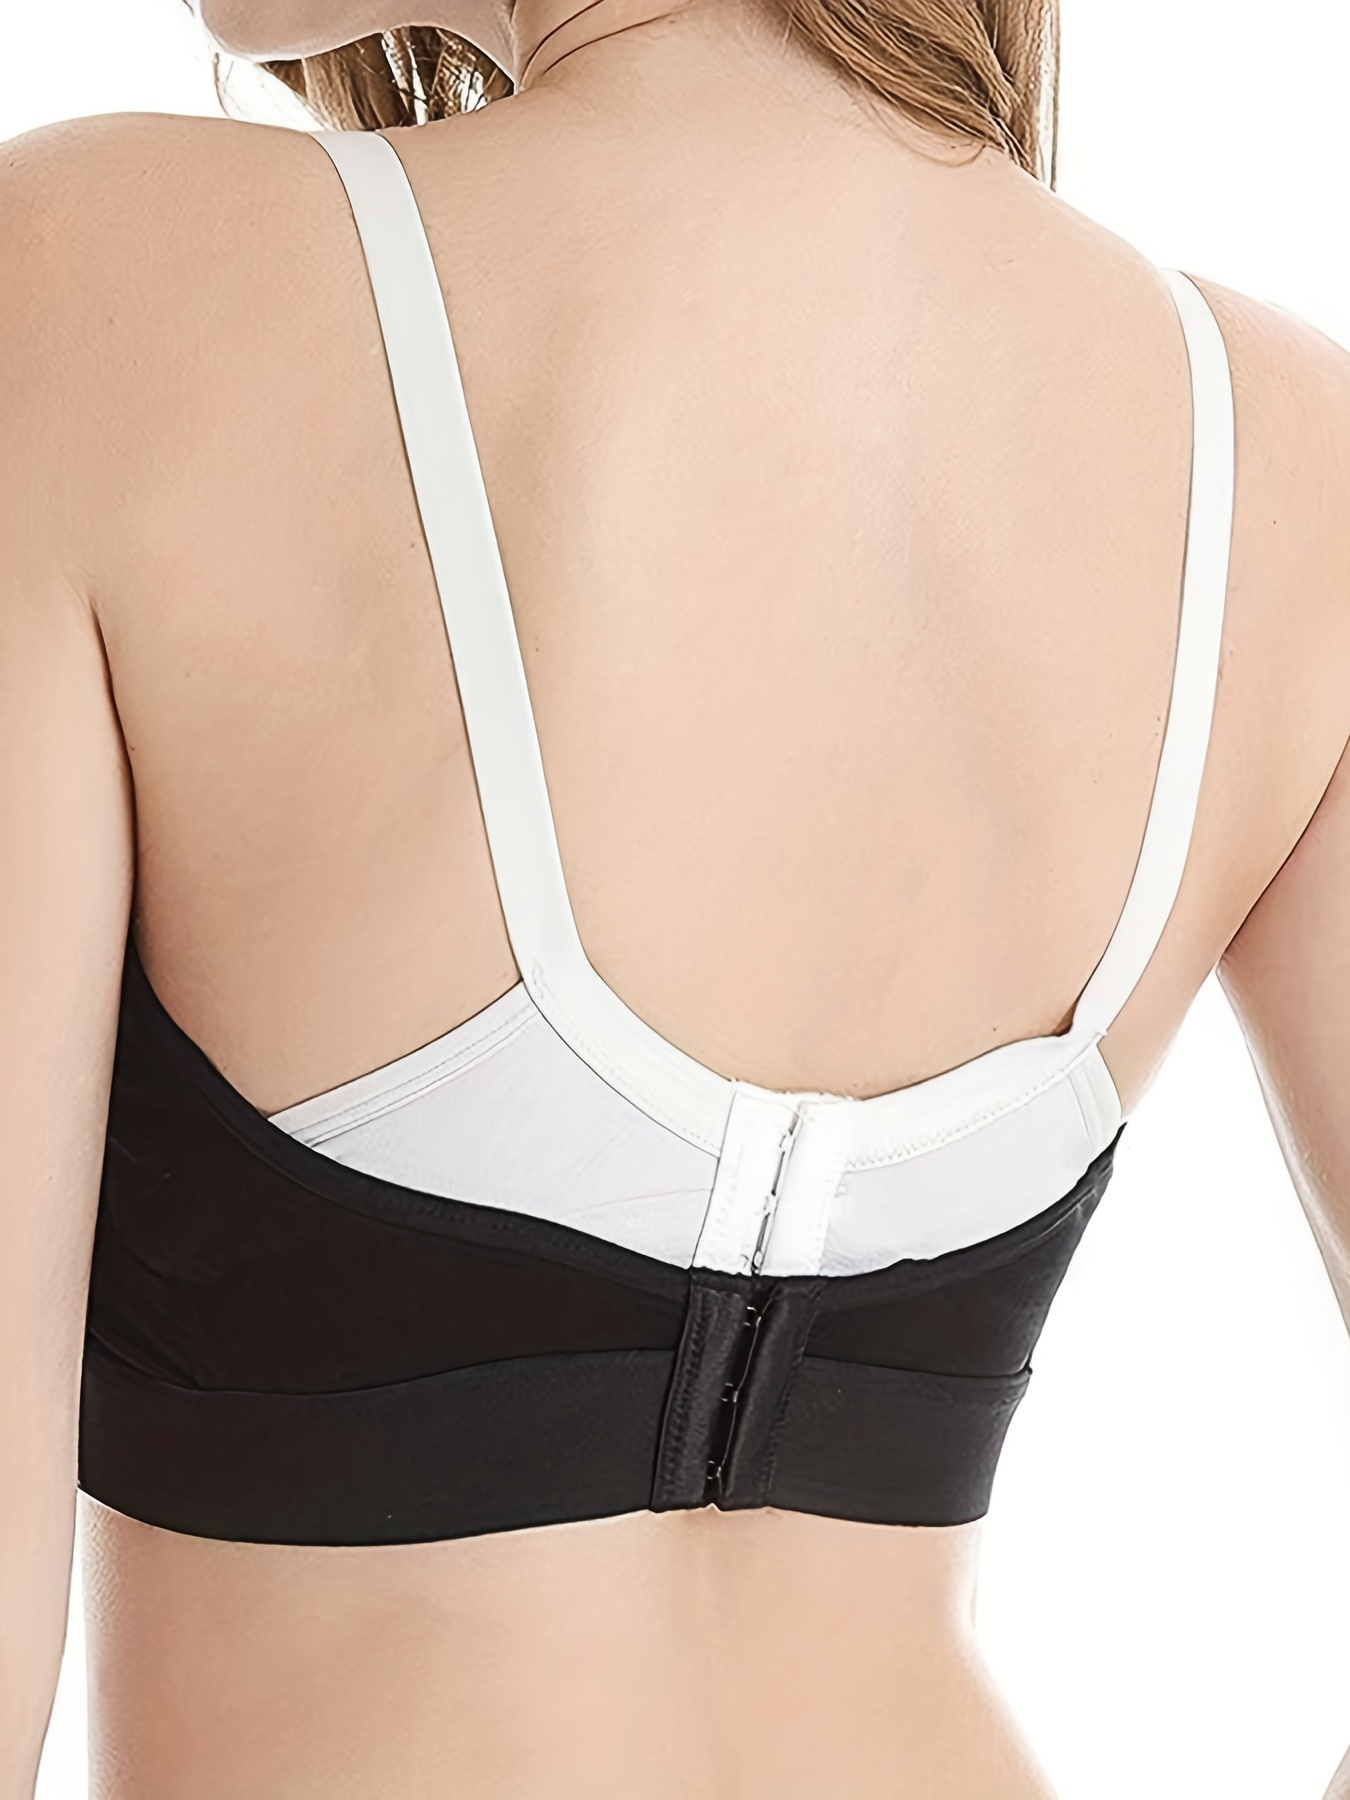 Nursing Bra With Front Open Easy Access, Comfortable Maternity